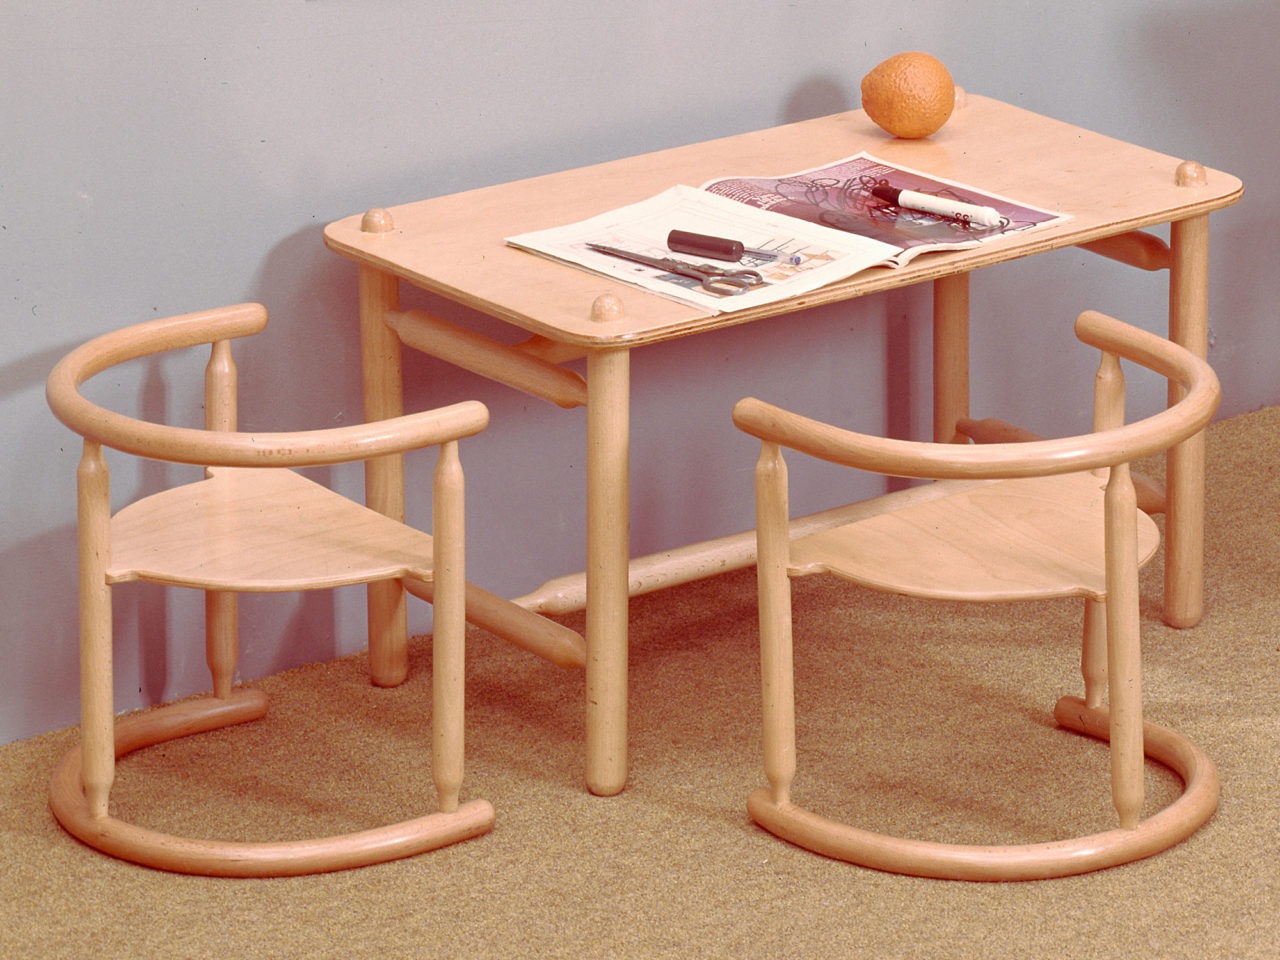 A child-size table and two chairs, made completely of light wood. Frames and details in soft, round shapes.